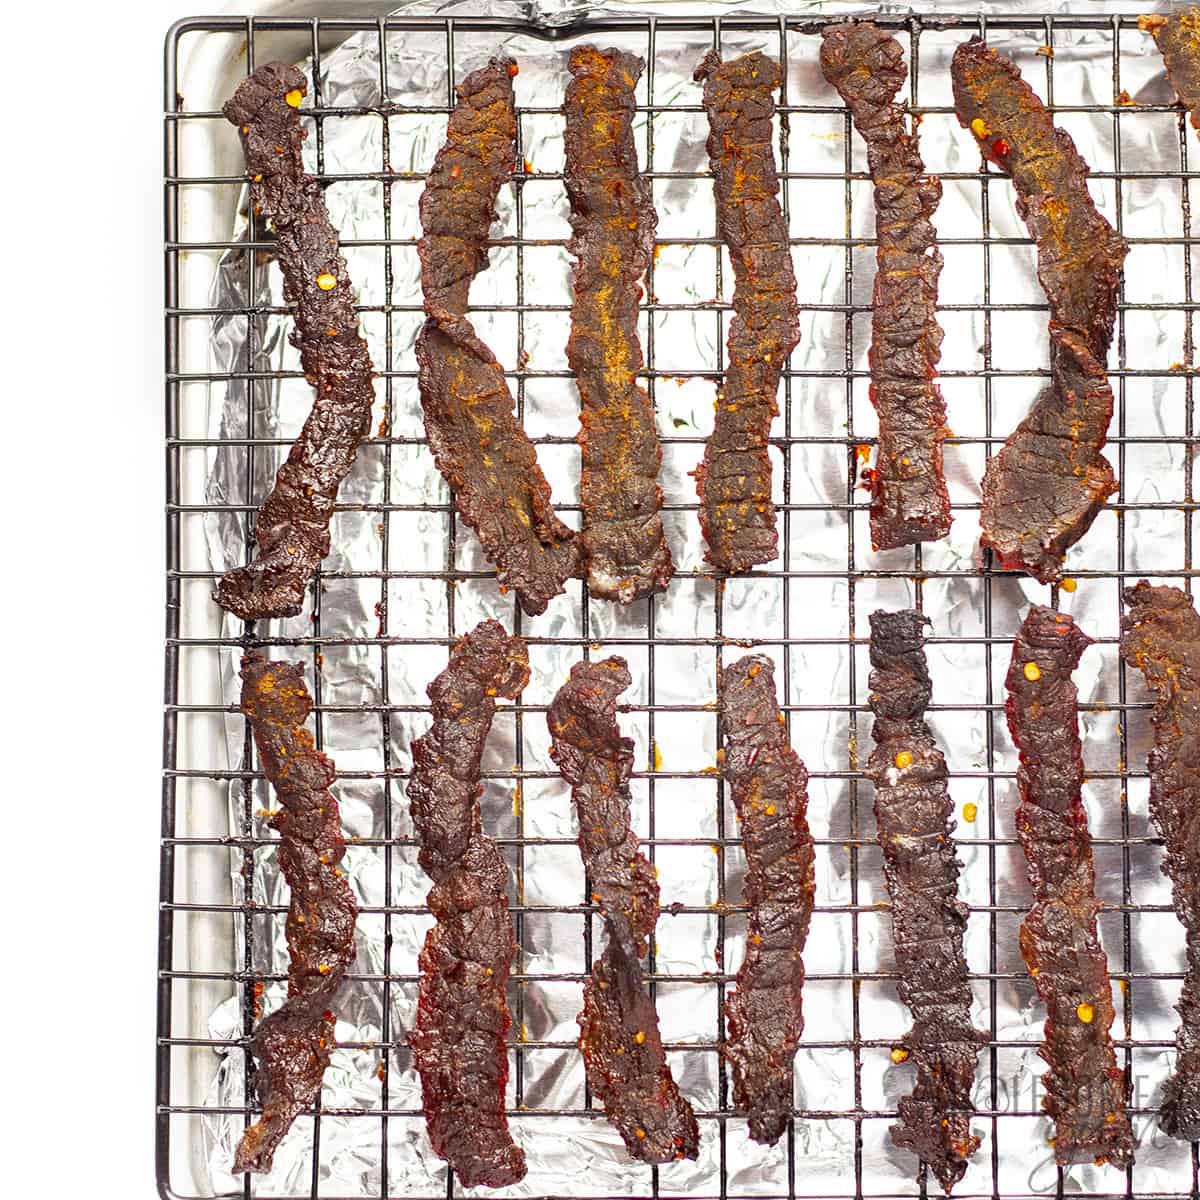 Baked homemade beef jerky on cooling rack.